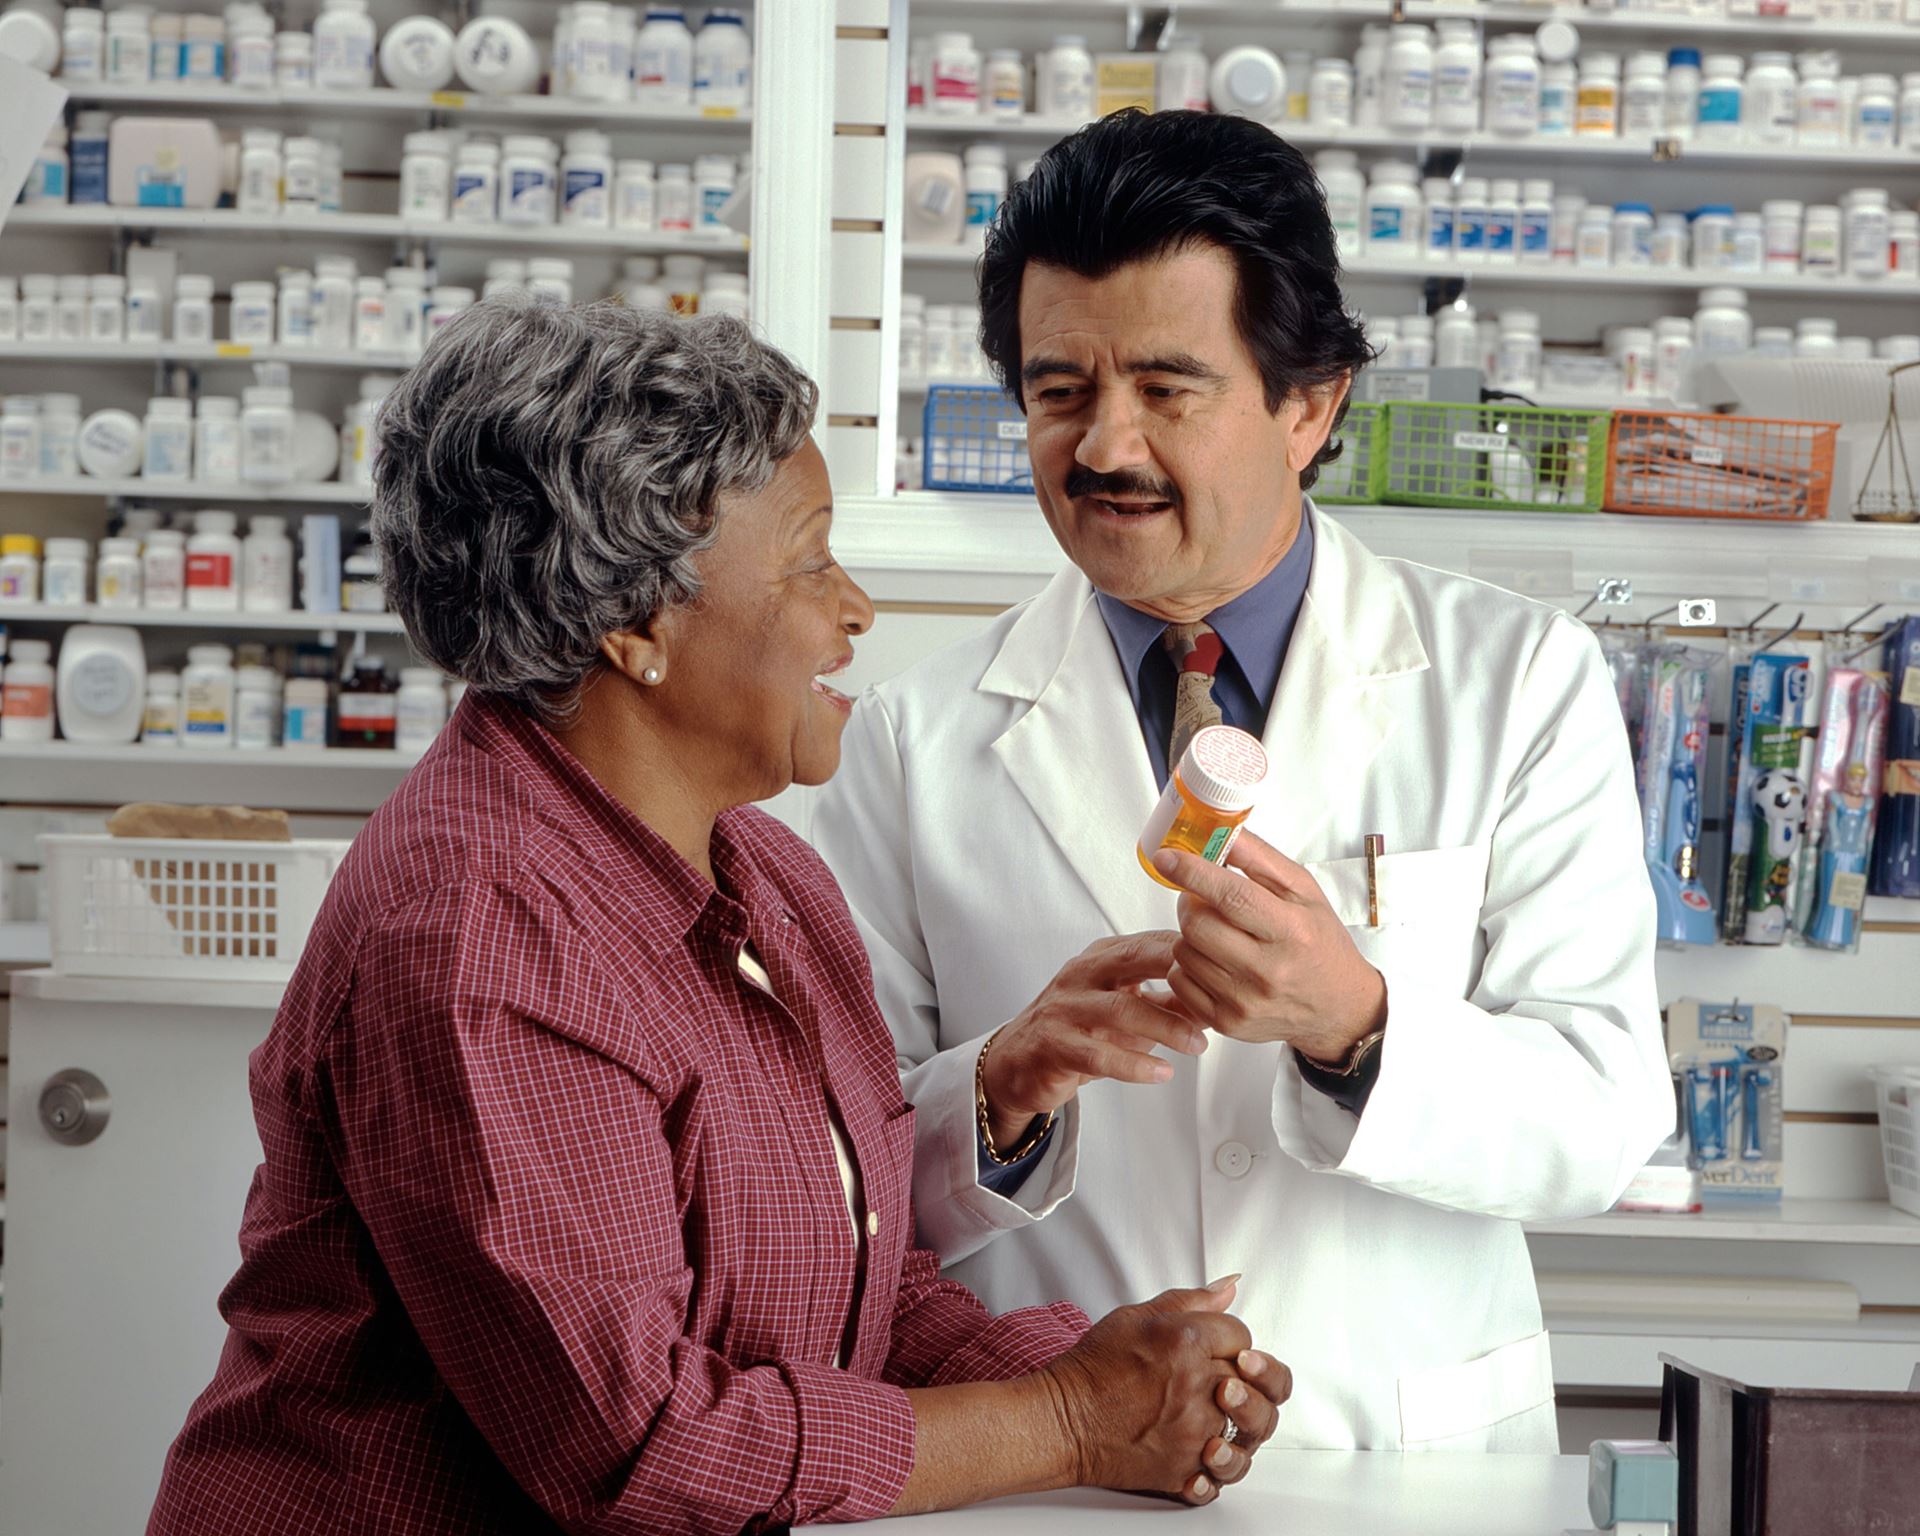 A pharmacist hands a bottle of pills to a woman